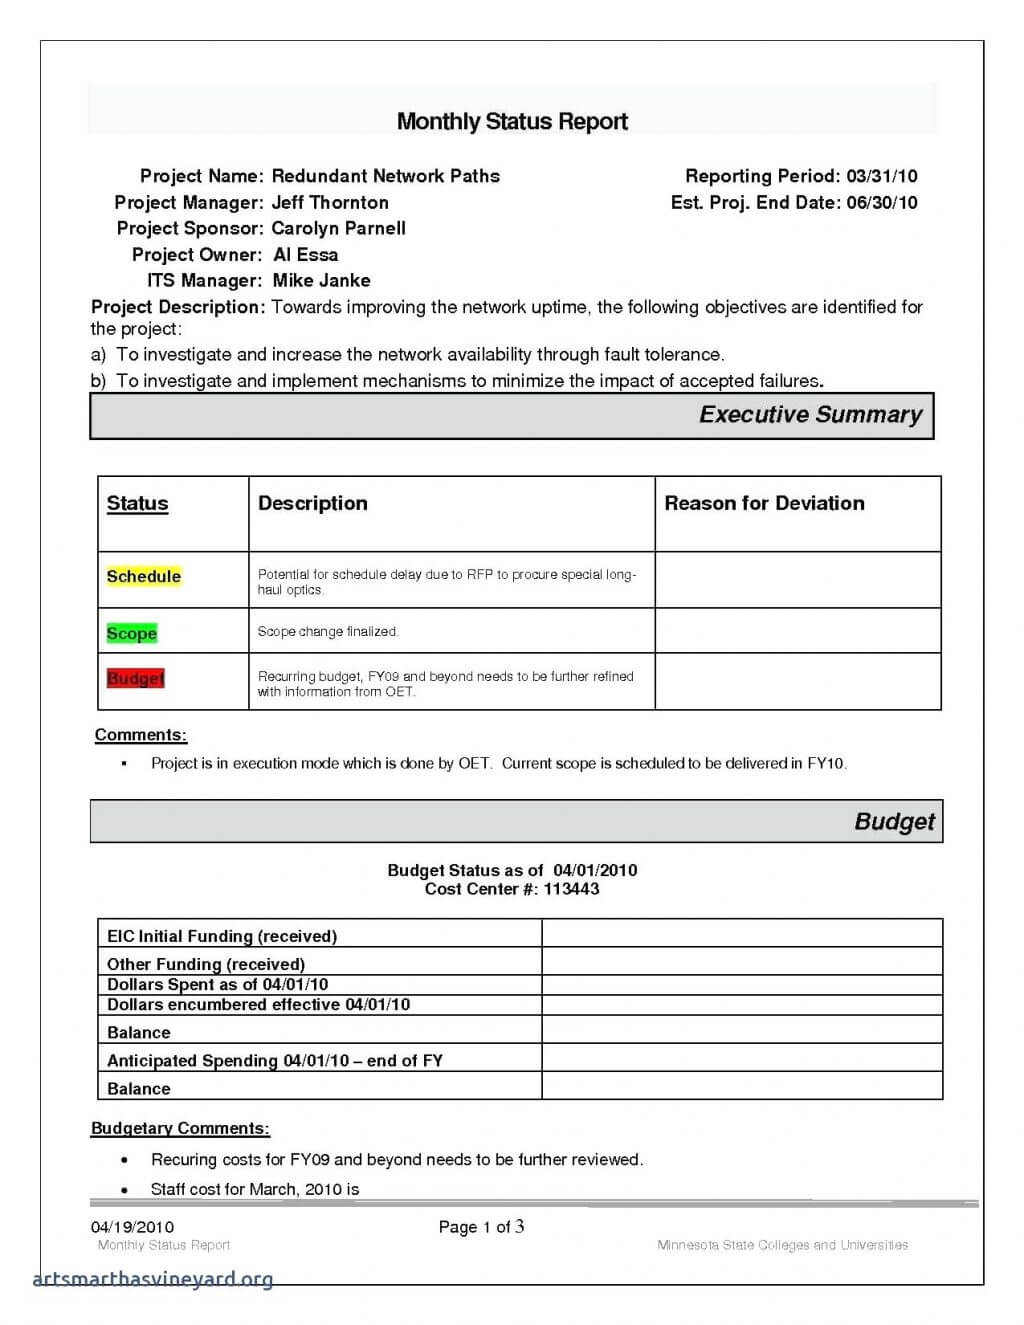 Weekly Report Template Examples Student Progress Pdf Format Pertaining To Project Status Report Template Word 2010